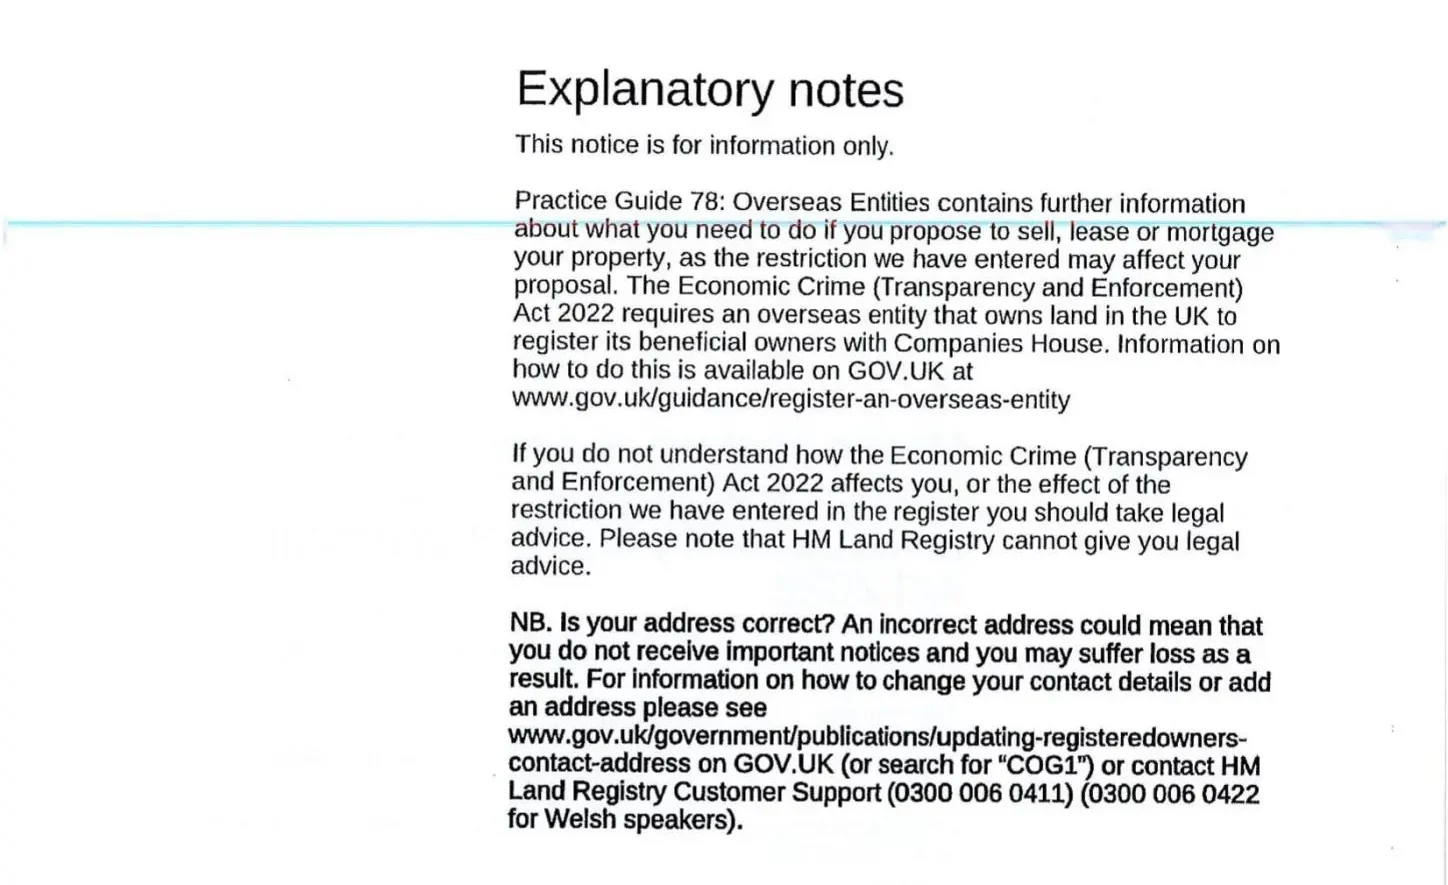 Letter from HM land and Registry